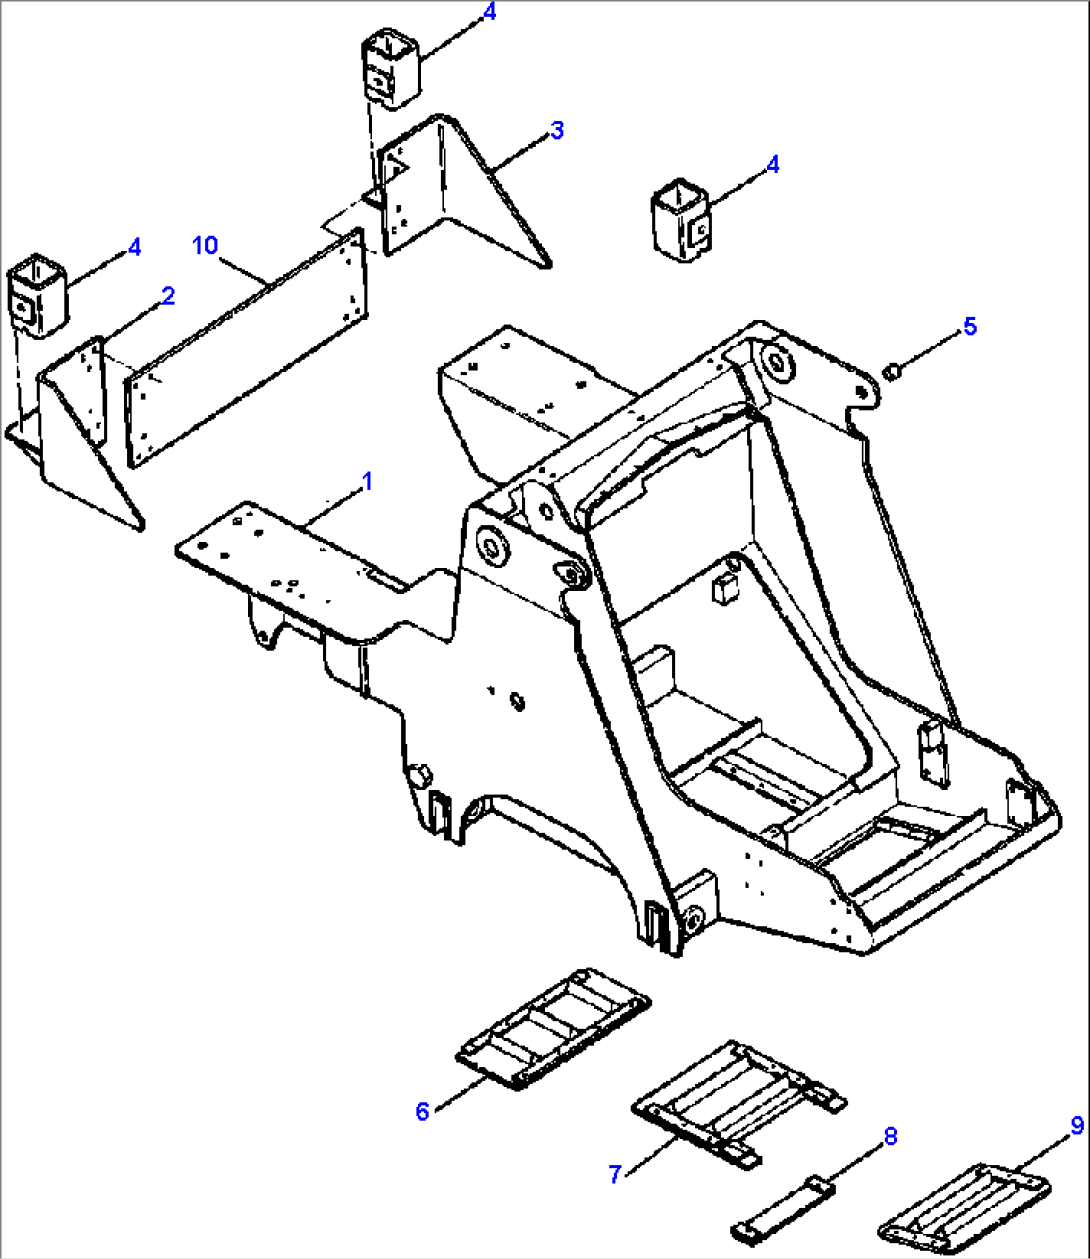 FRONT FRAME (WITH ROPS CANOPY MOUNTS)